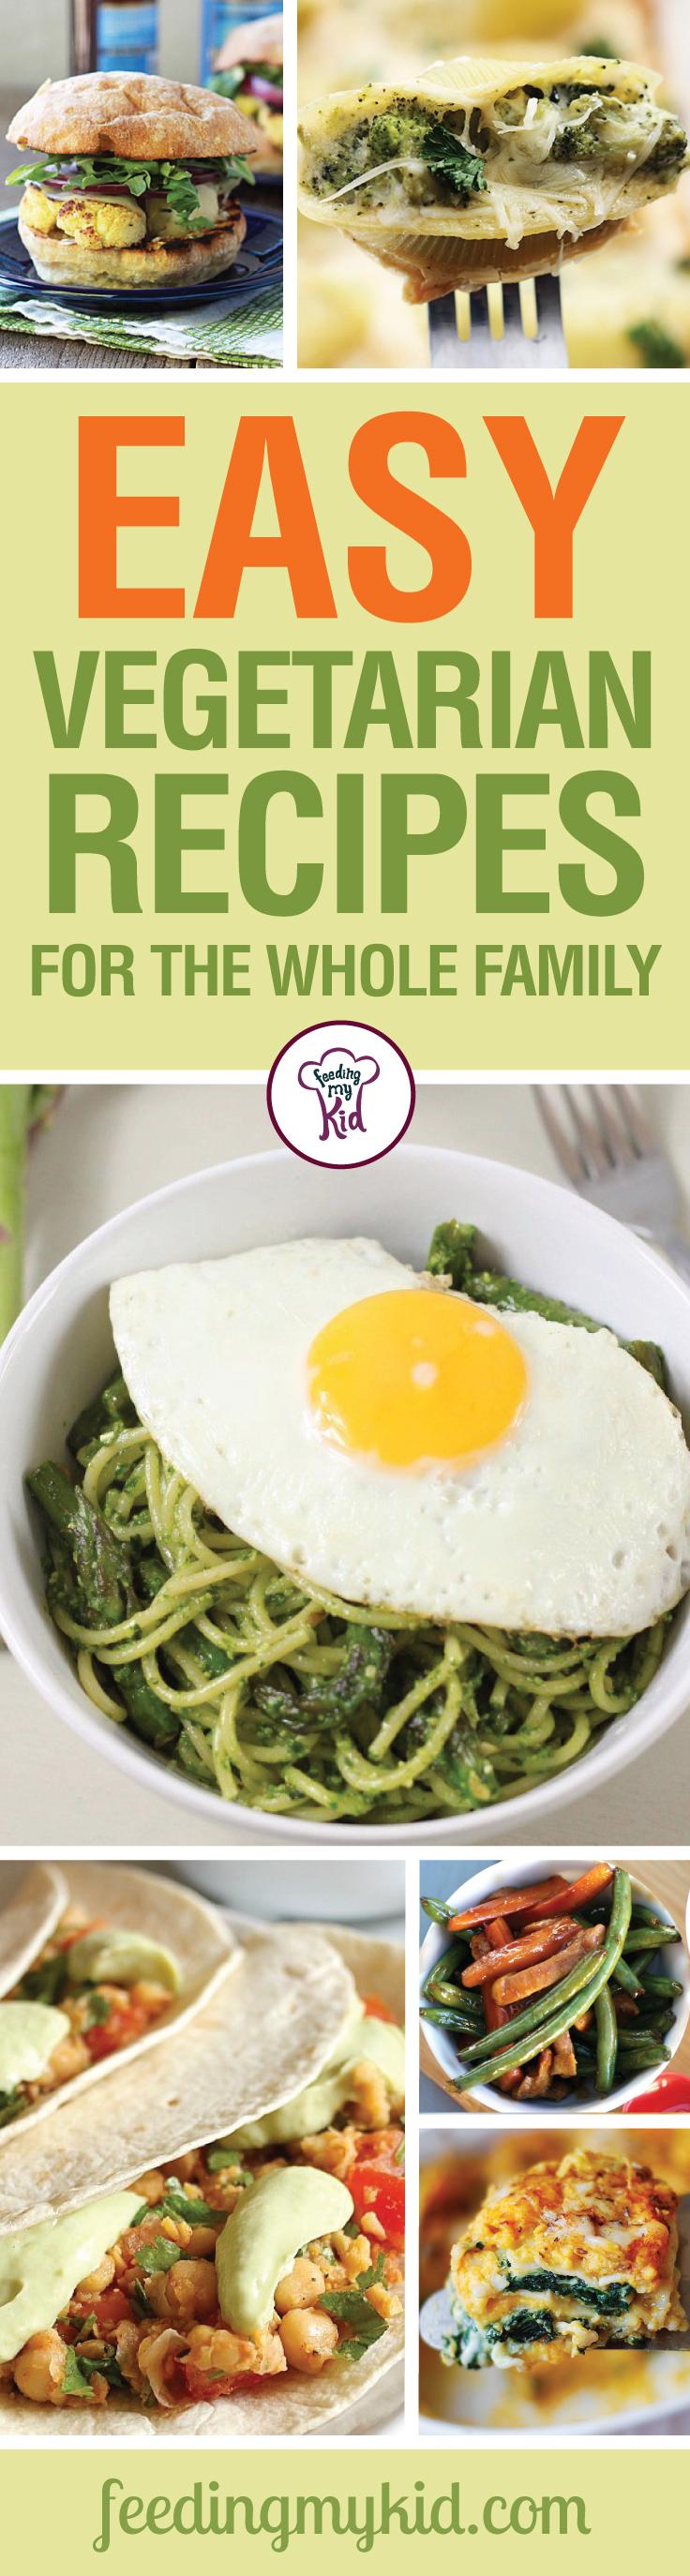 Easy Vegetarian Recipes for the Whole Family